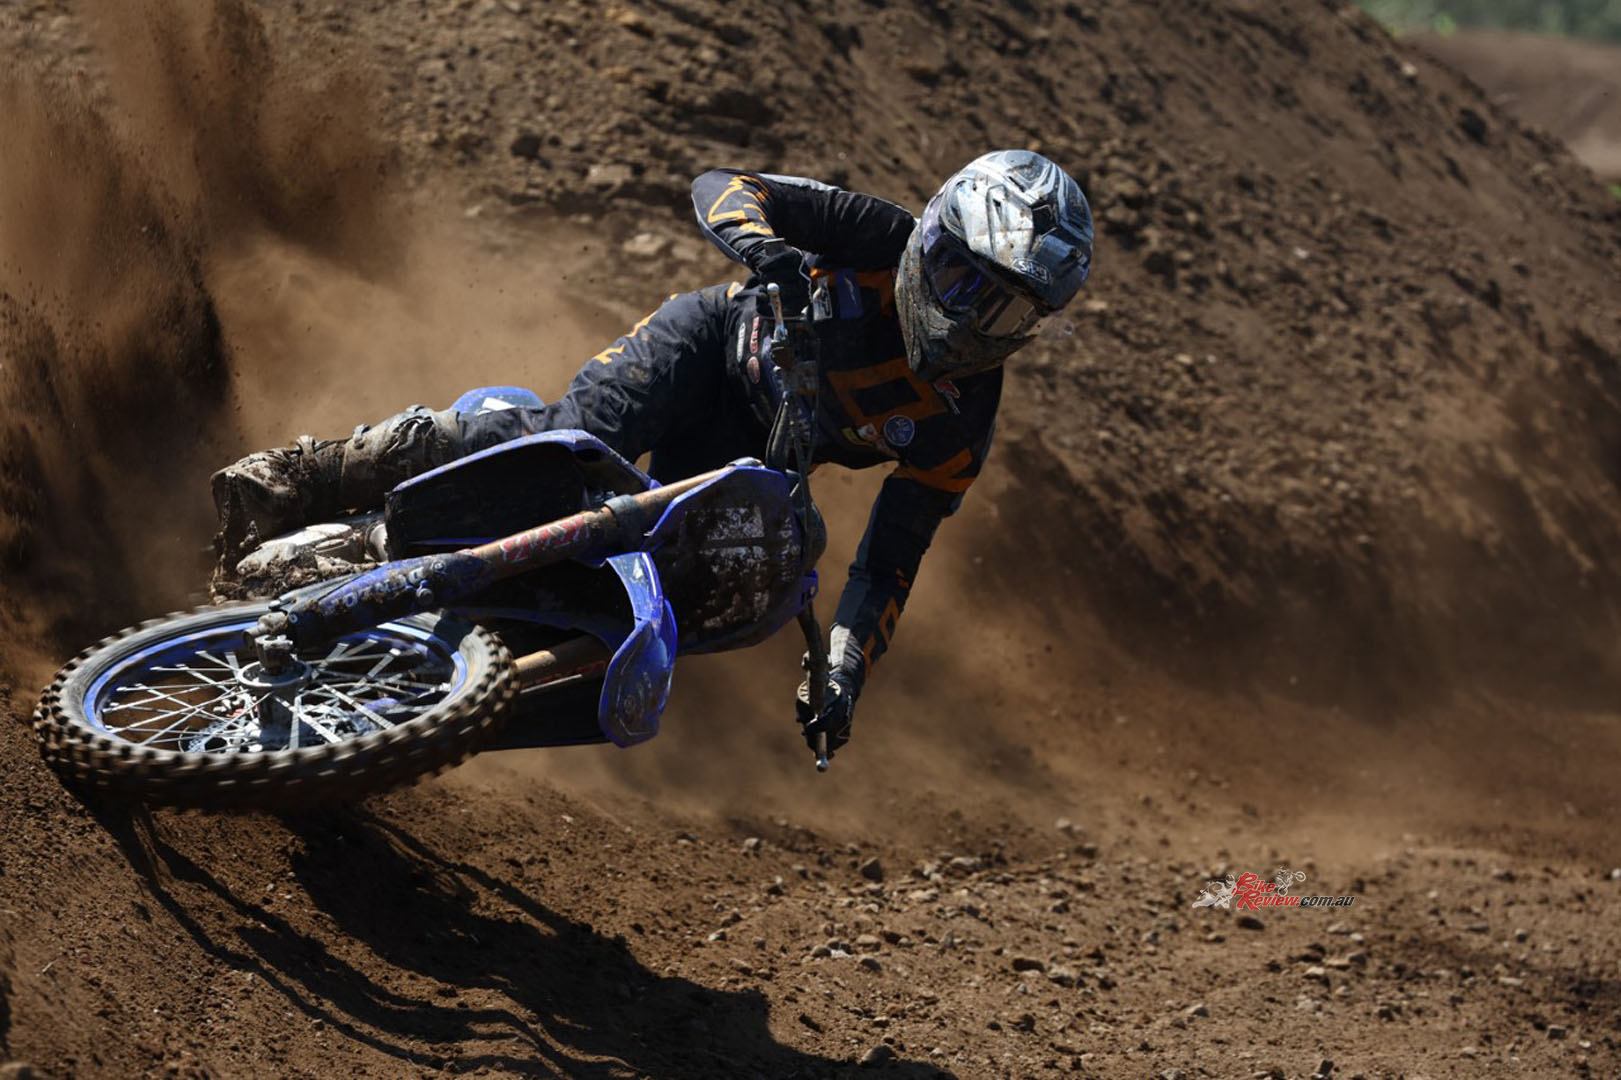 Australia’s Jay Wilson has got his season off to the perfect start taking all three race wins at the opening round of the DID All Japan Motocross Championship, held over the weekend.